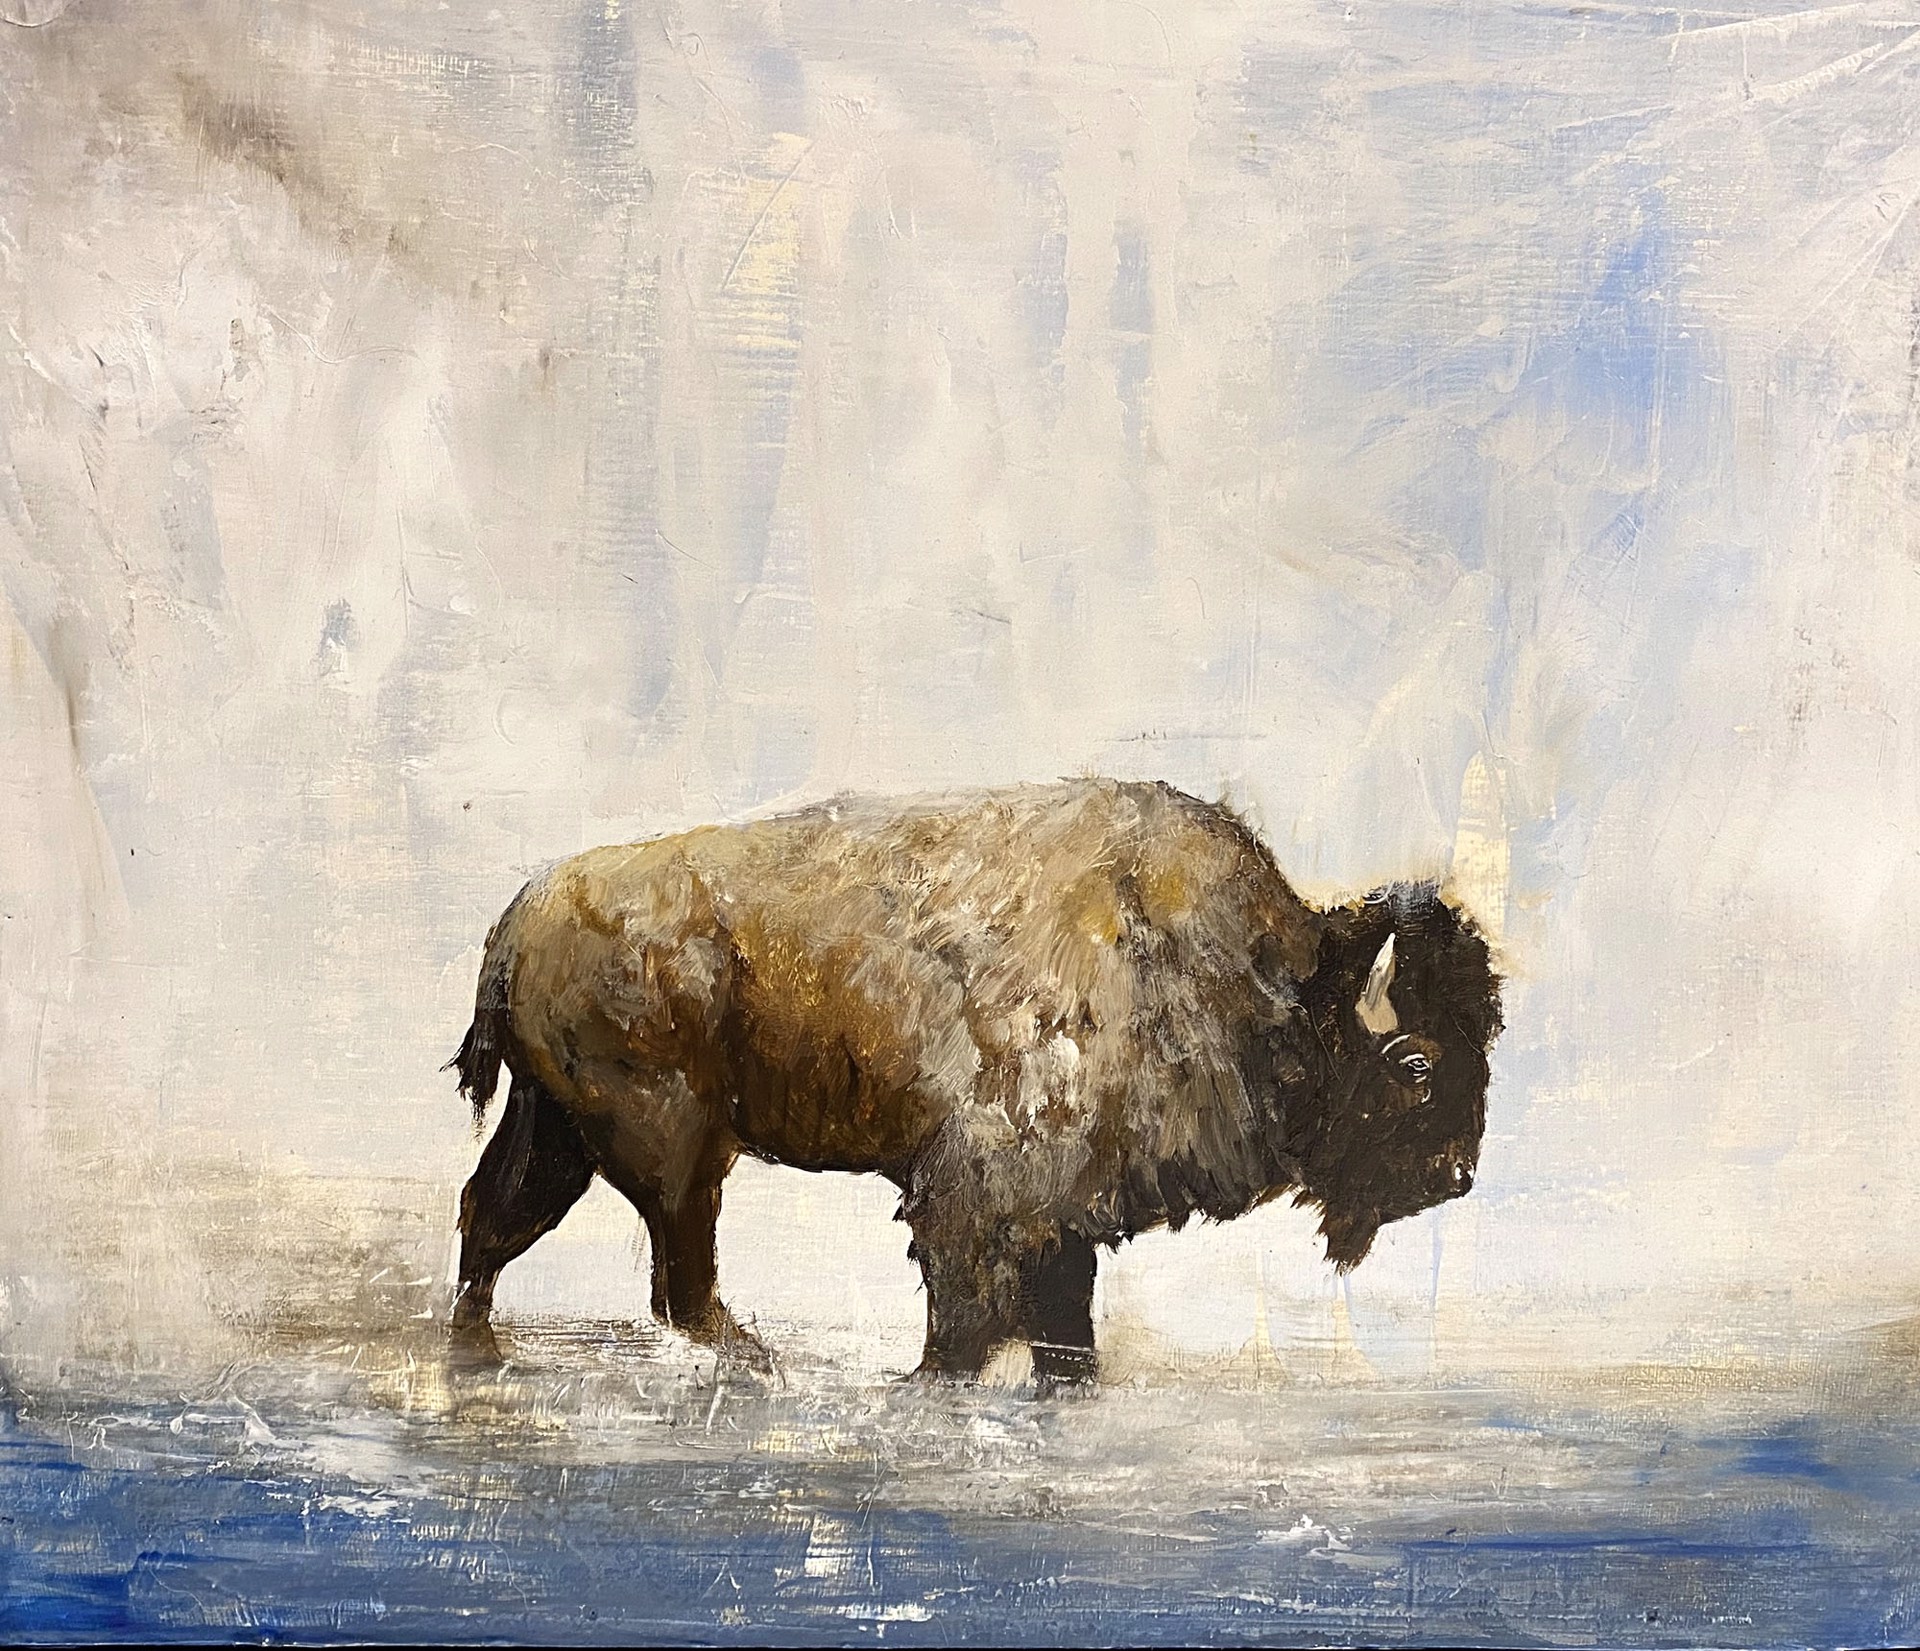 Original Oil Painting Of a Bison Walking In Abstract Water With A Contemporary Style Waterfall Background, By Jenna Von Benedikt